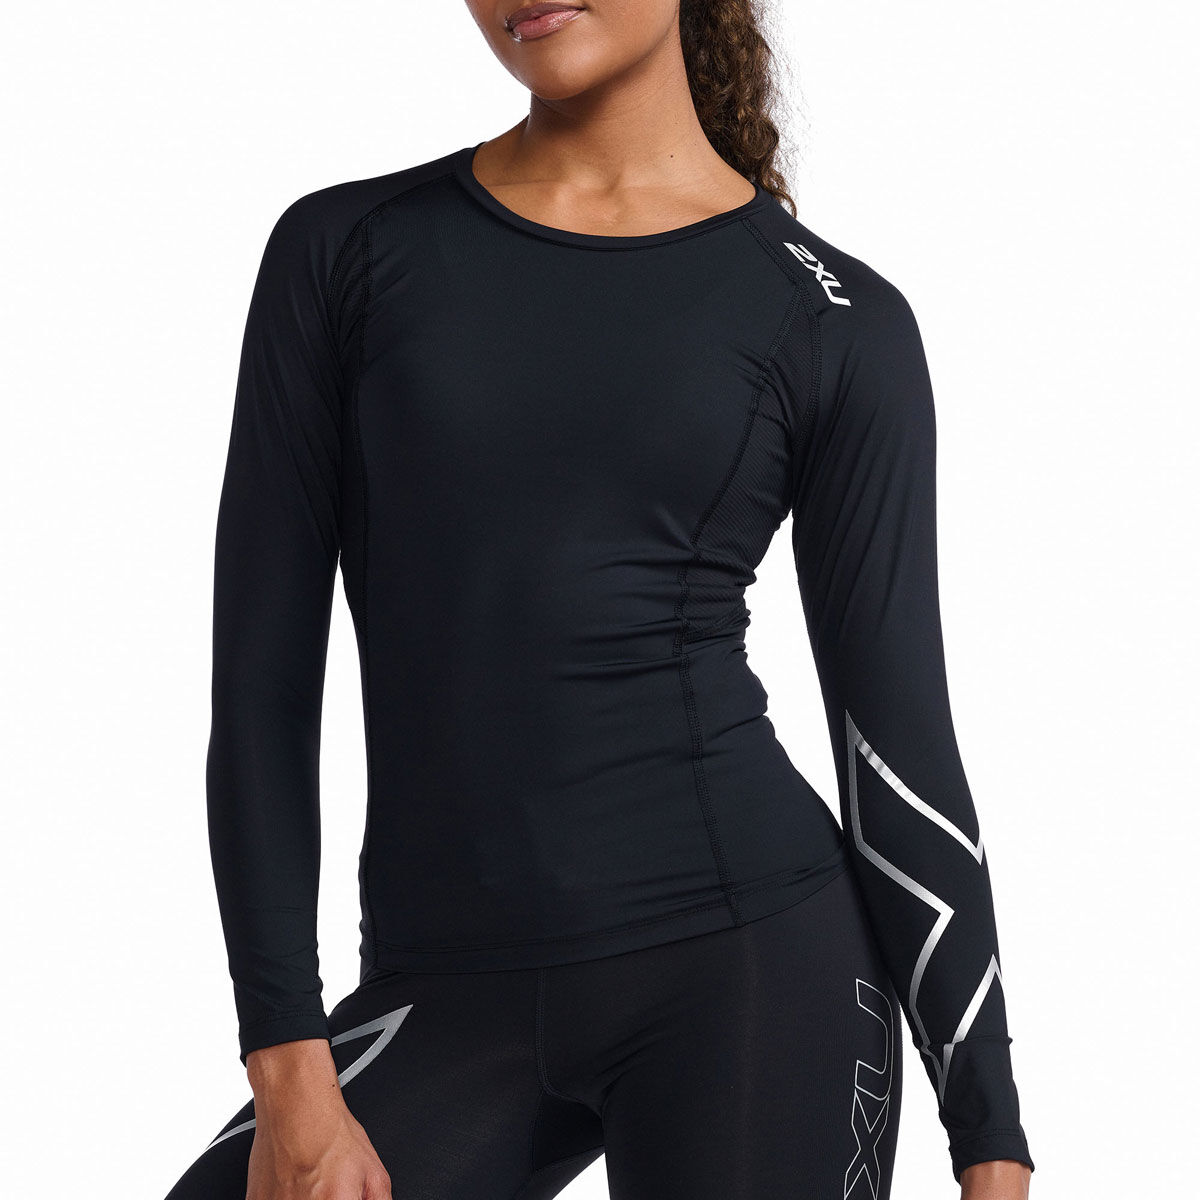 Women's Compression Clothing 